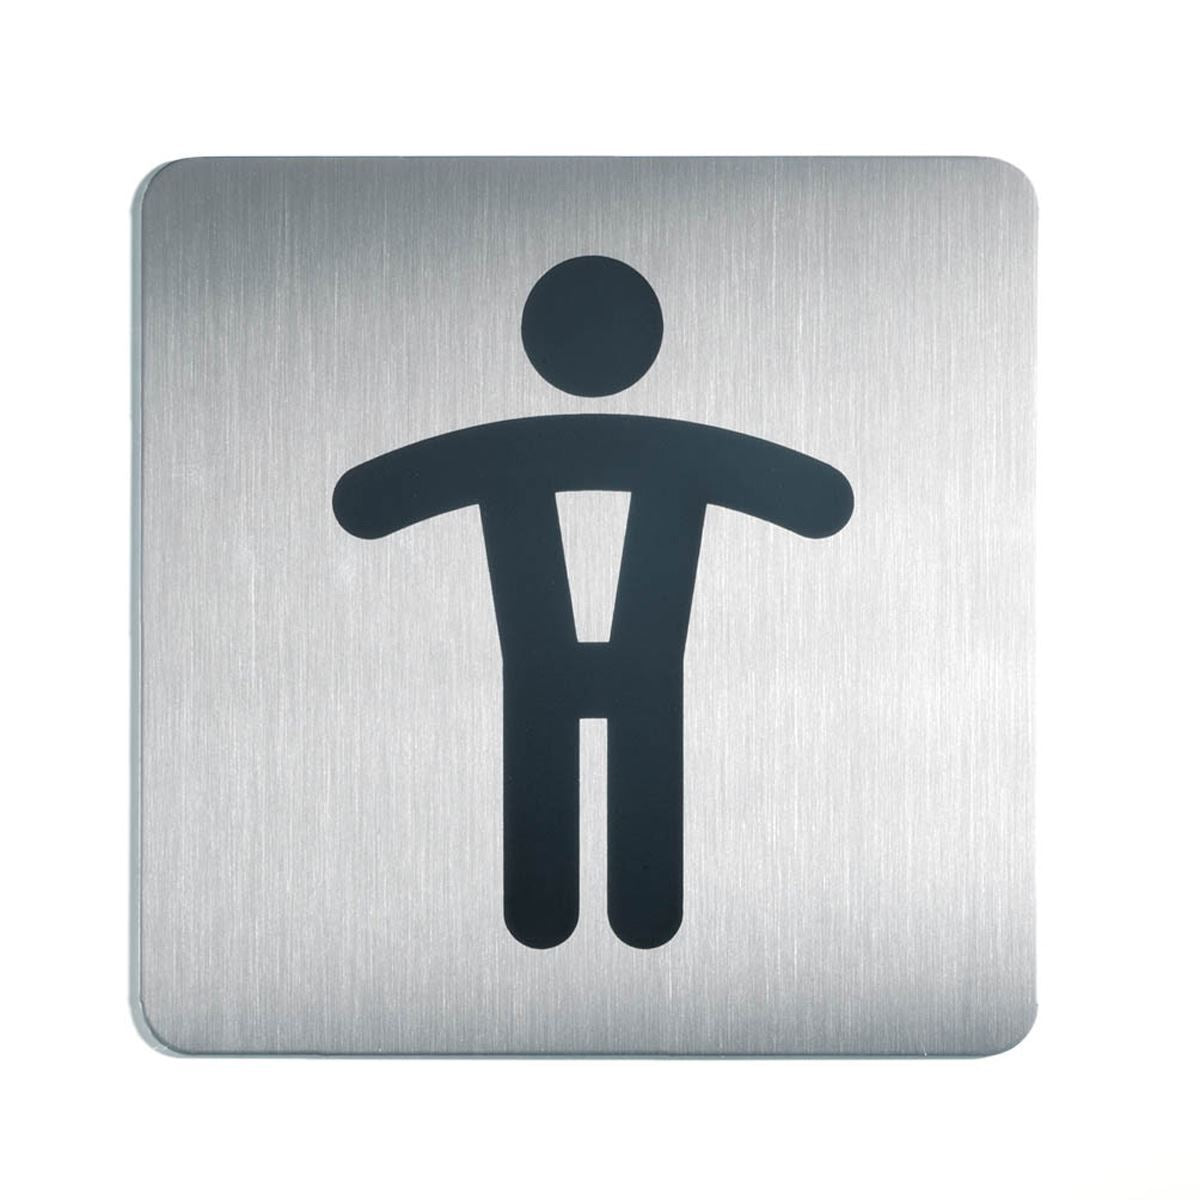 Durable Adhesive Men's WC Symbol Bathroom Toilet Sign | Stainless Steel | Square